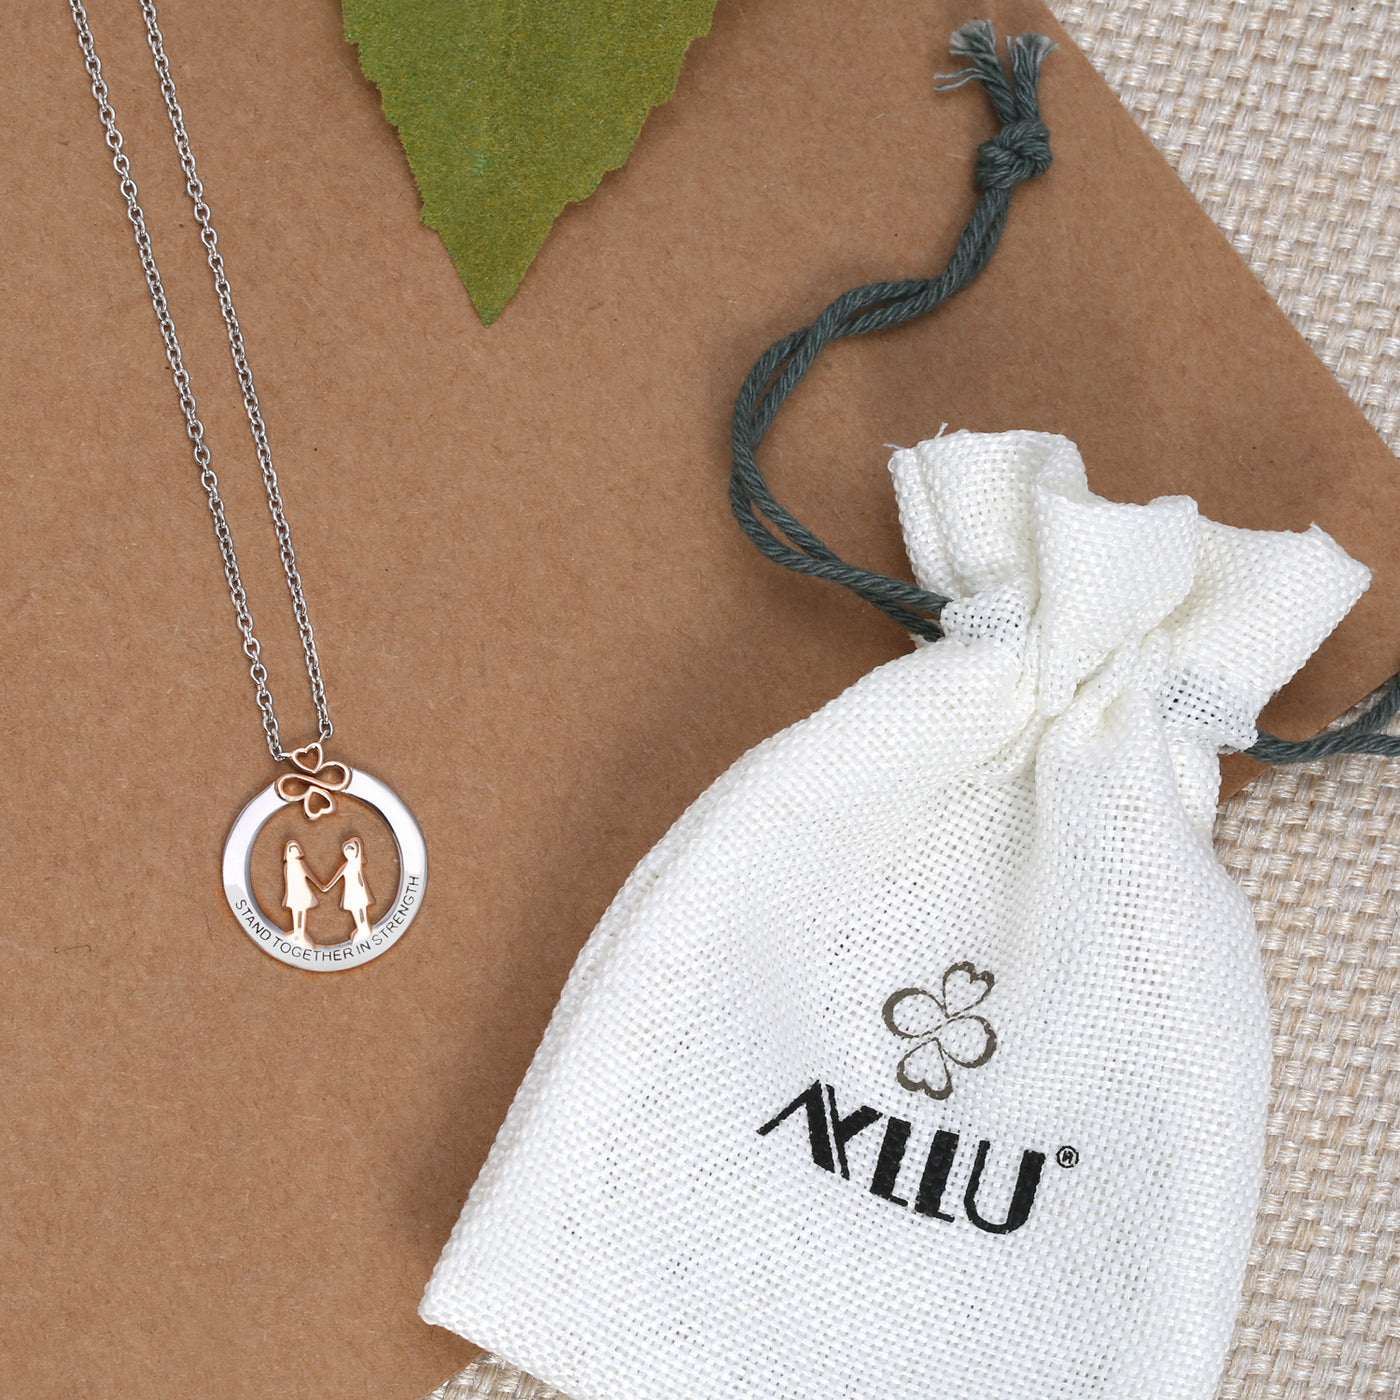 Ayllu Stand Together in Strength BFF Pendant Necklace Rose Gold Silver